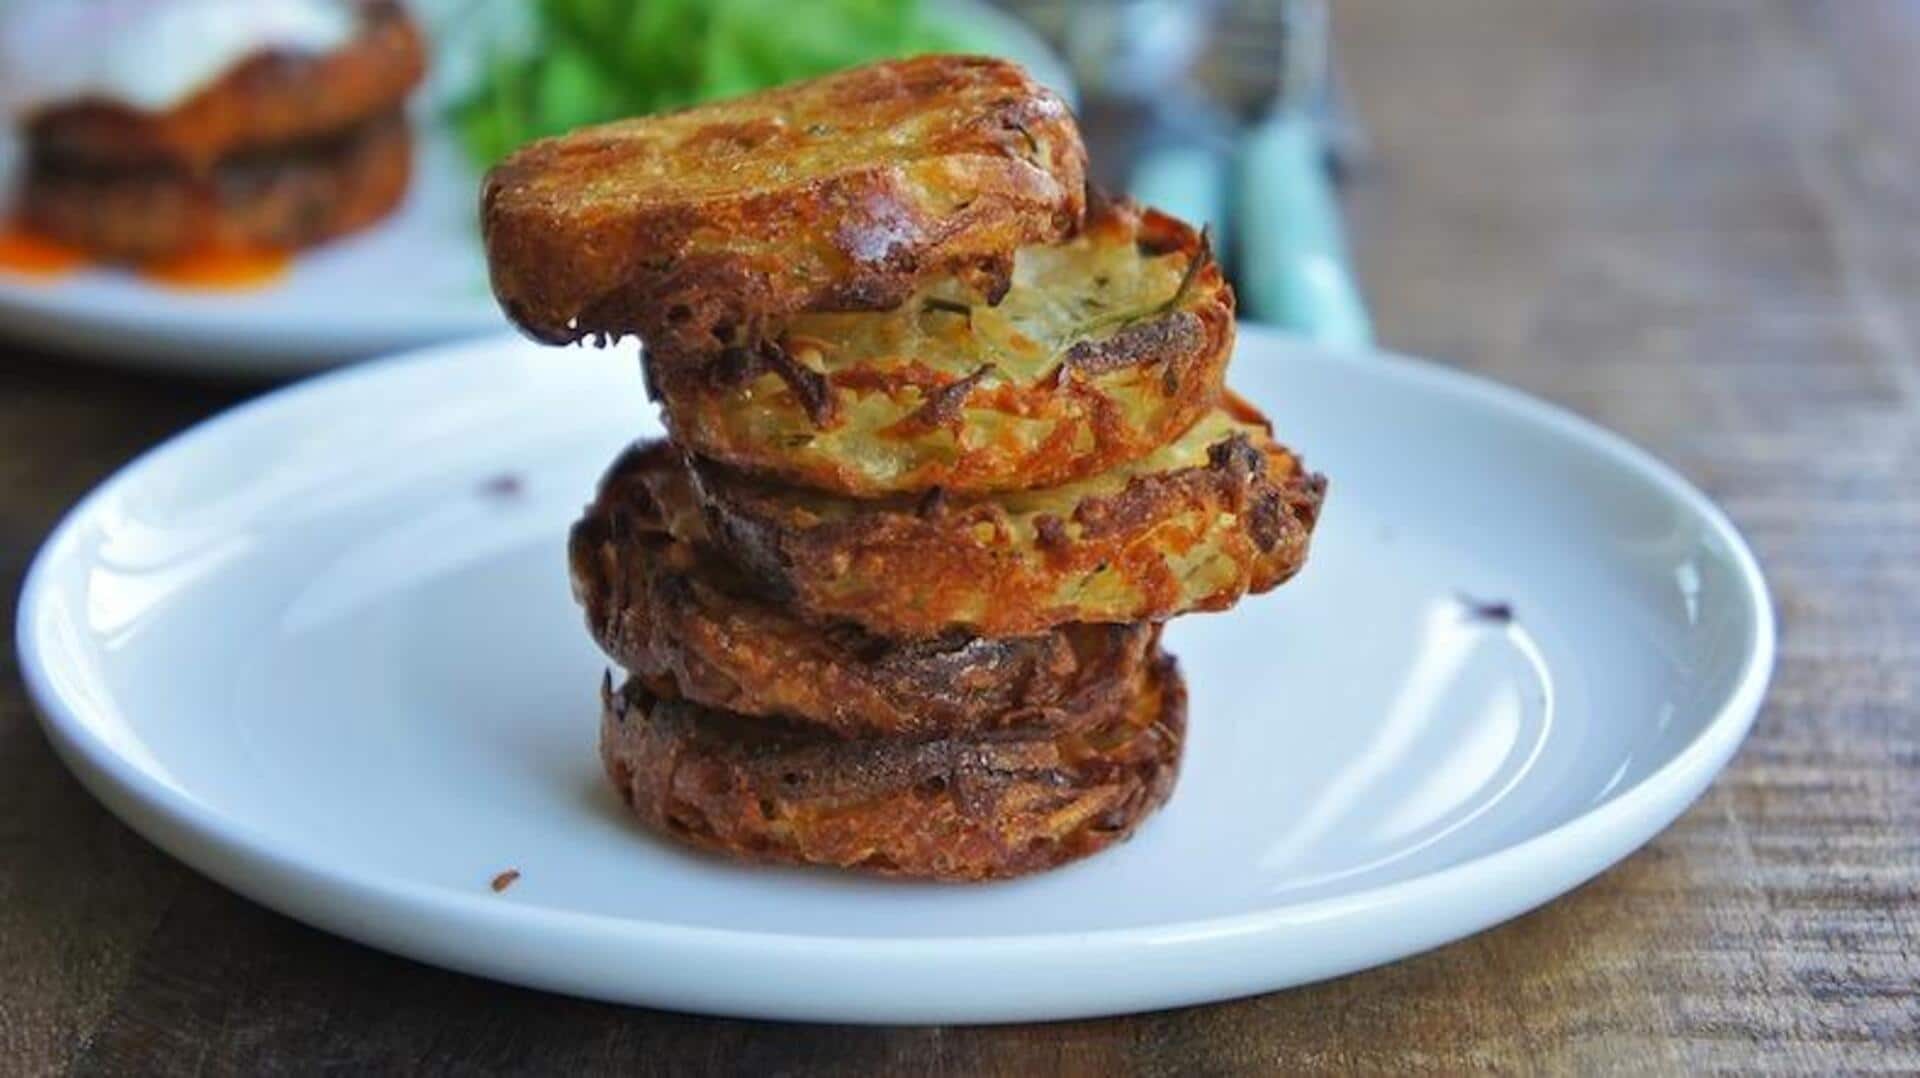 Make this Swiss rosti with a zucchini twist at home